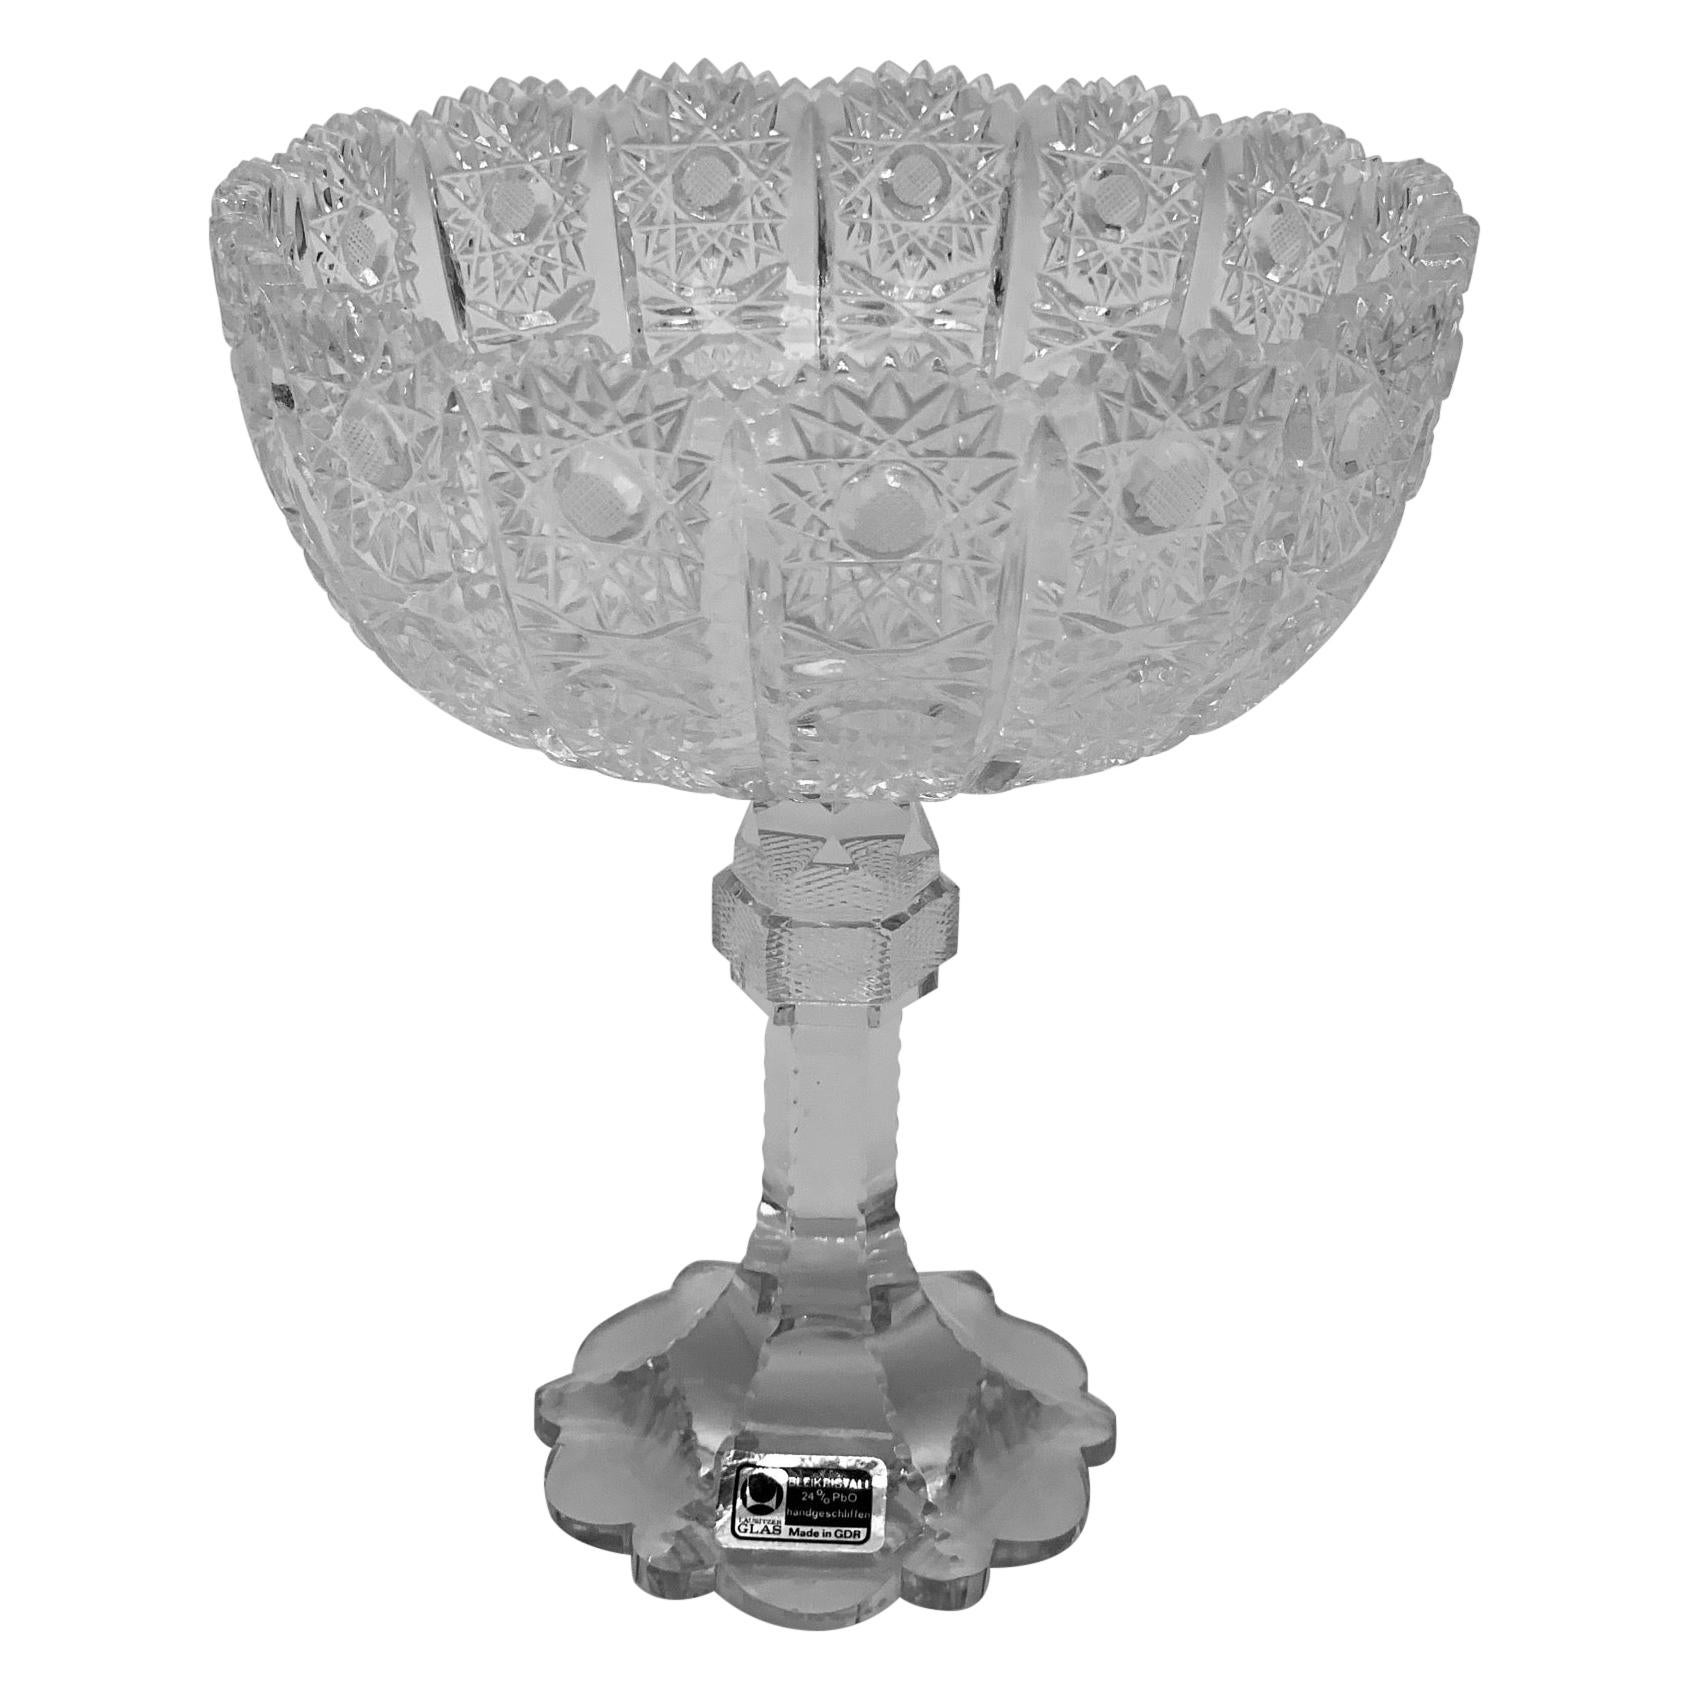 1945 Servebowl with Lead Crystal Cut Patterns